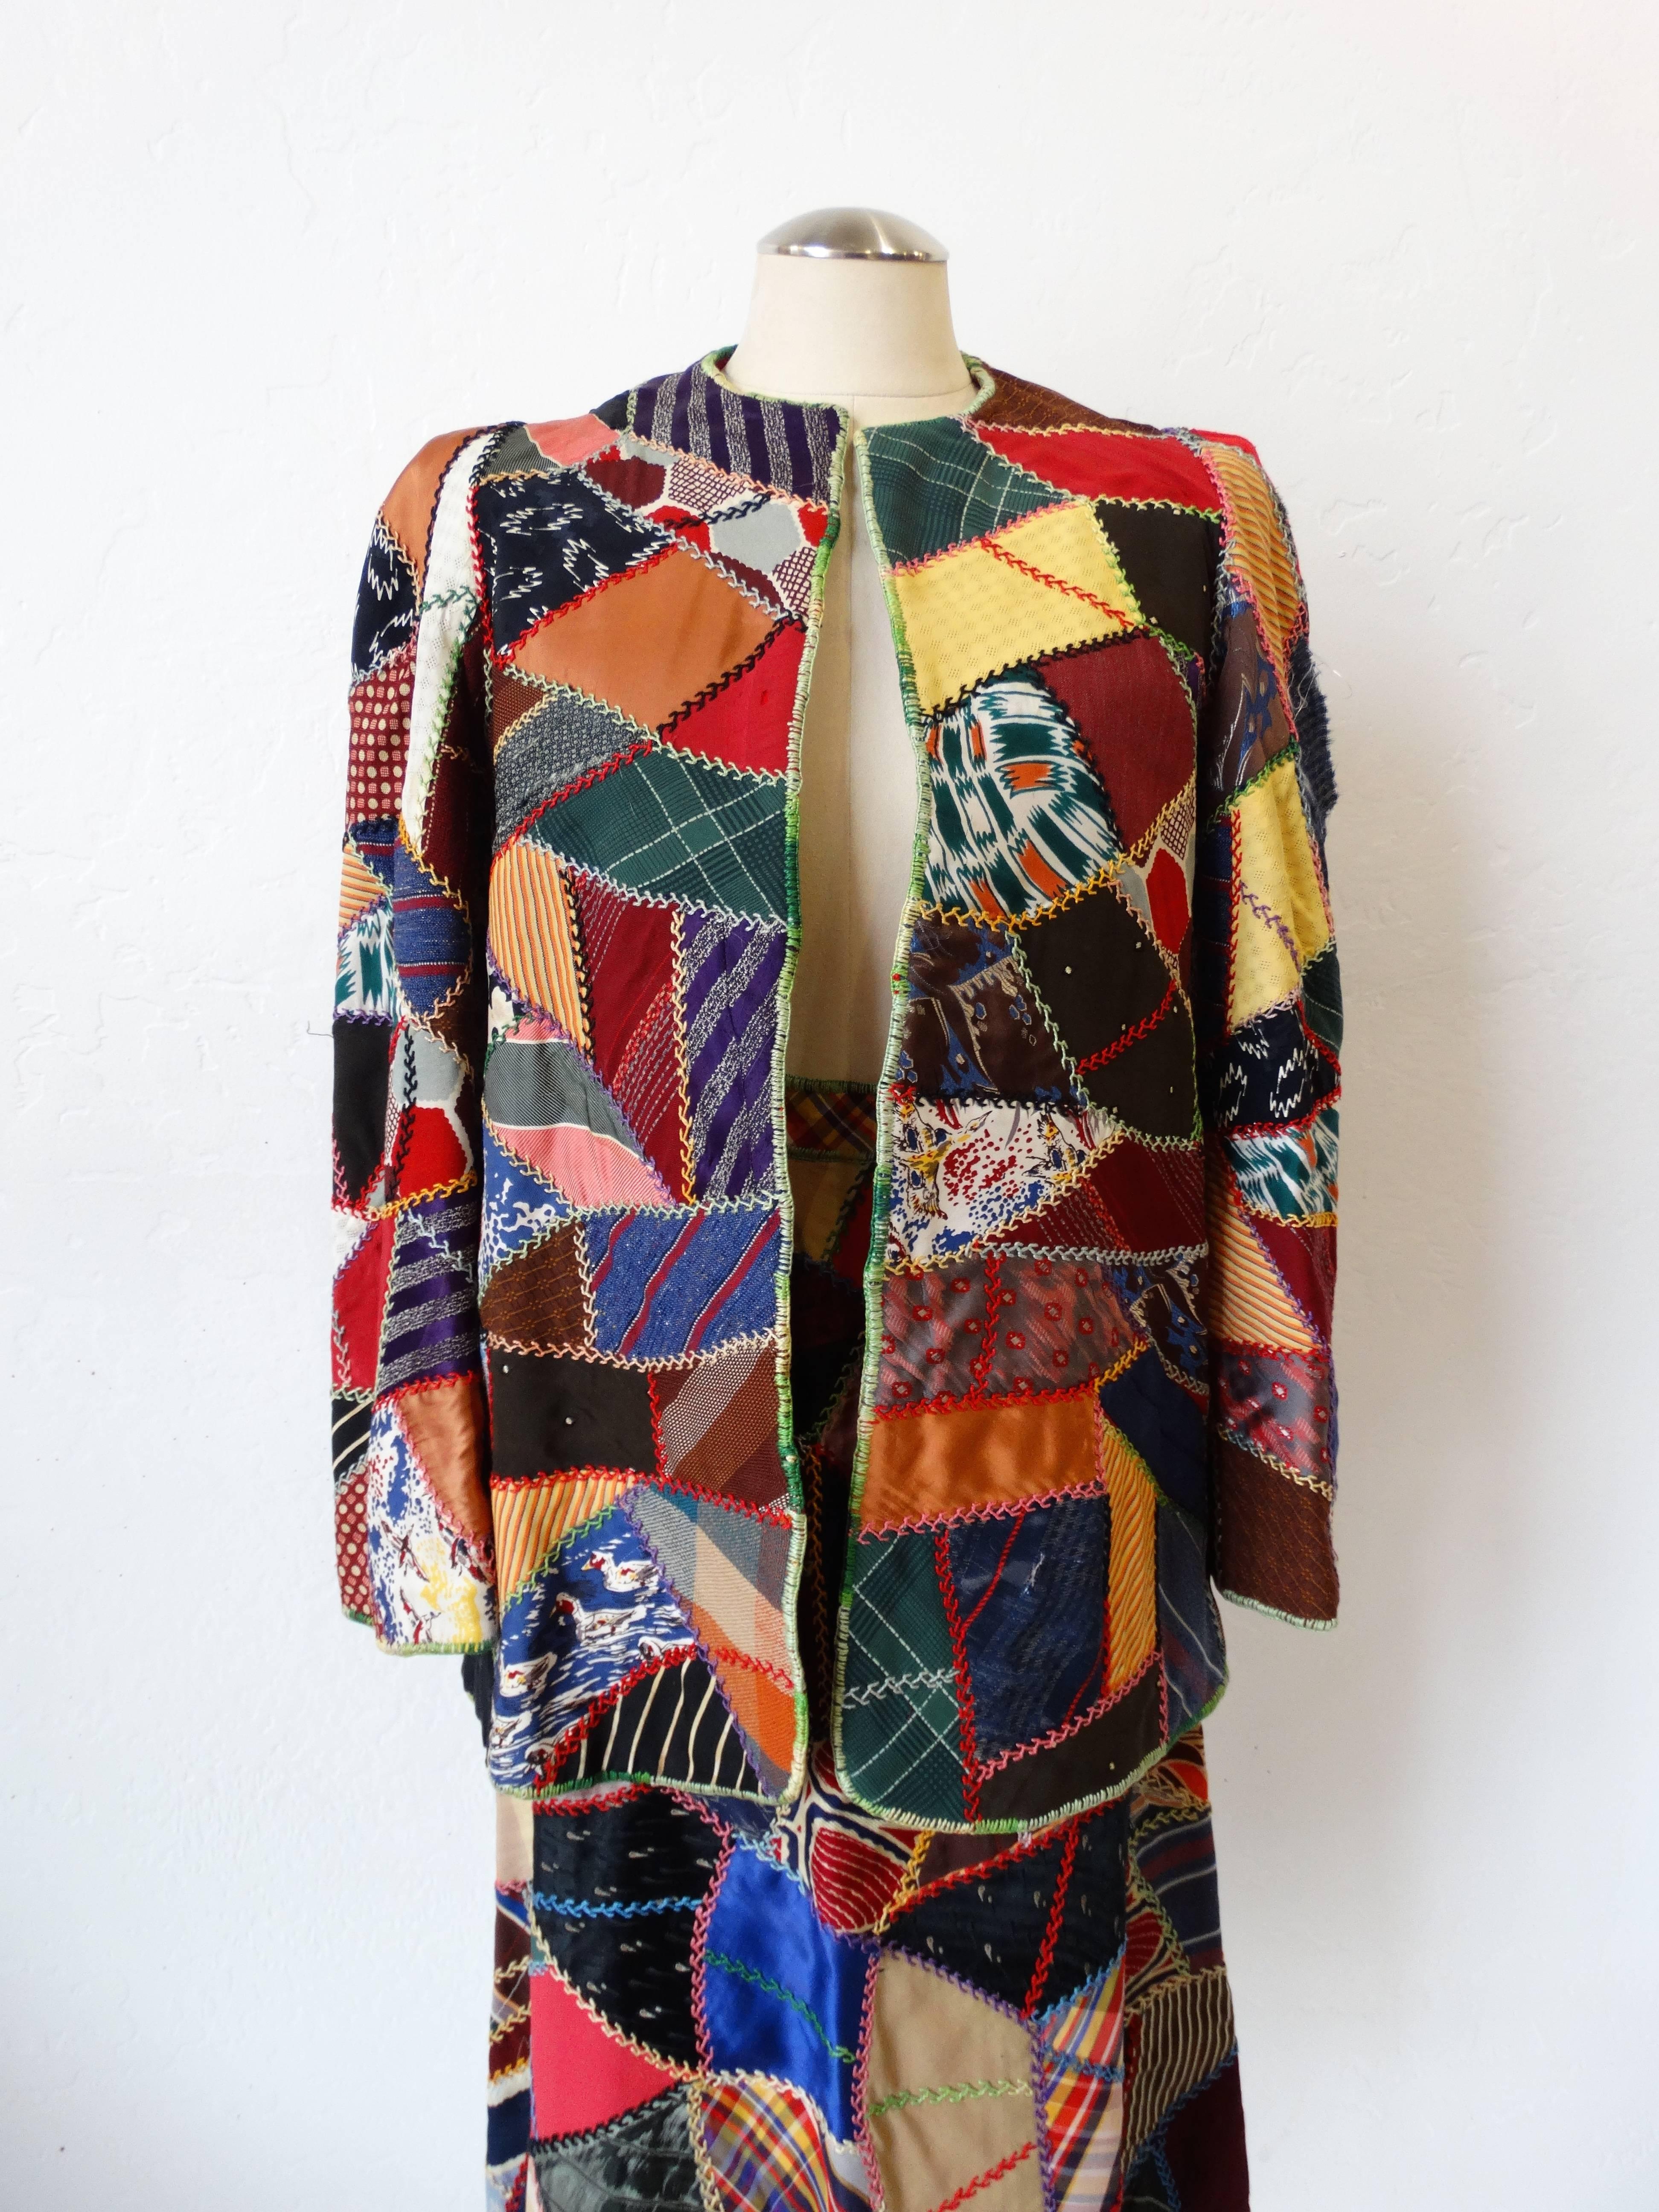 Super seventies patchwork jacket and skirt set! These pieces are covered in prints galore! Patches of multicolored print with contrasting rainbow stitching throughout. Skirt features a high waisted fit and knee length, zips up the side and fastens